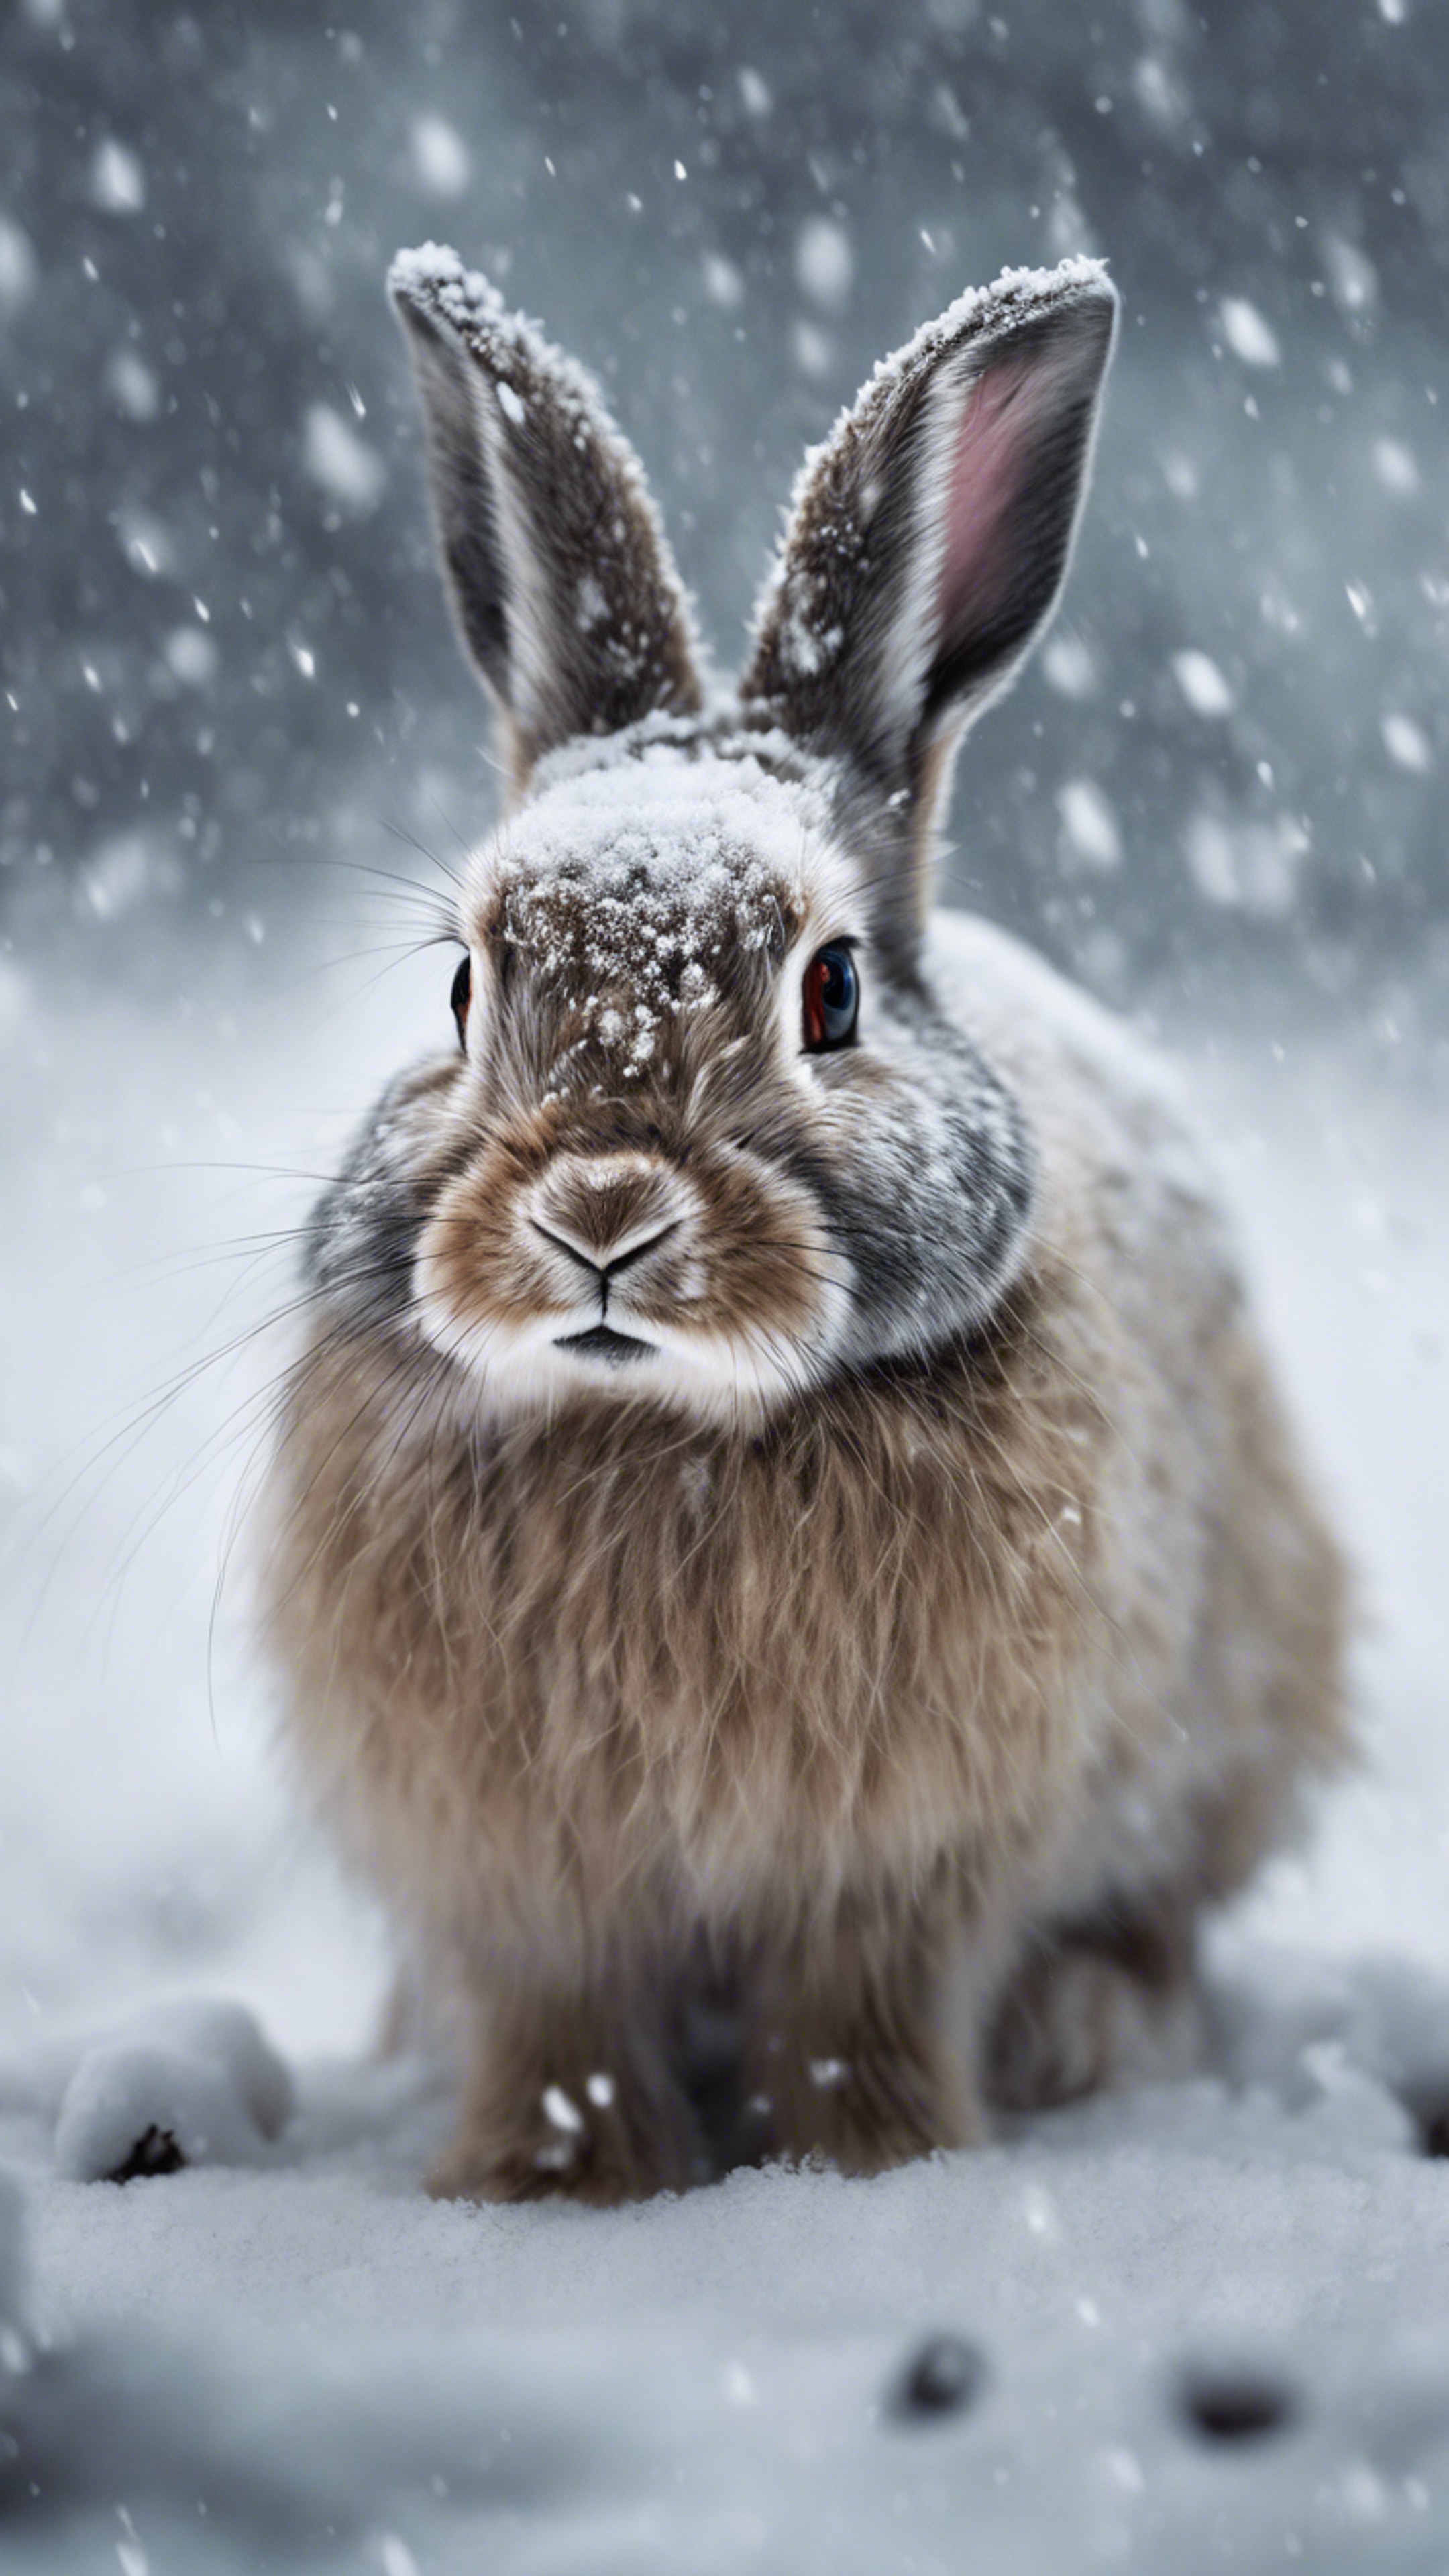 An Arctic rabbit braving a blizzard, its fur blending in with the snow. Wallpaper[f8597e39ec4d4470ac43]